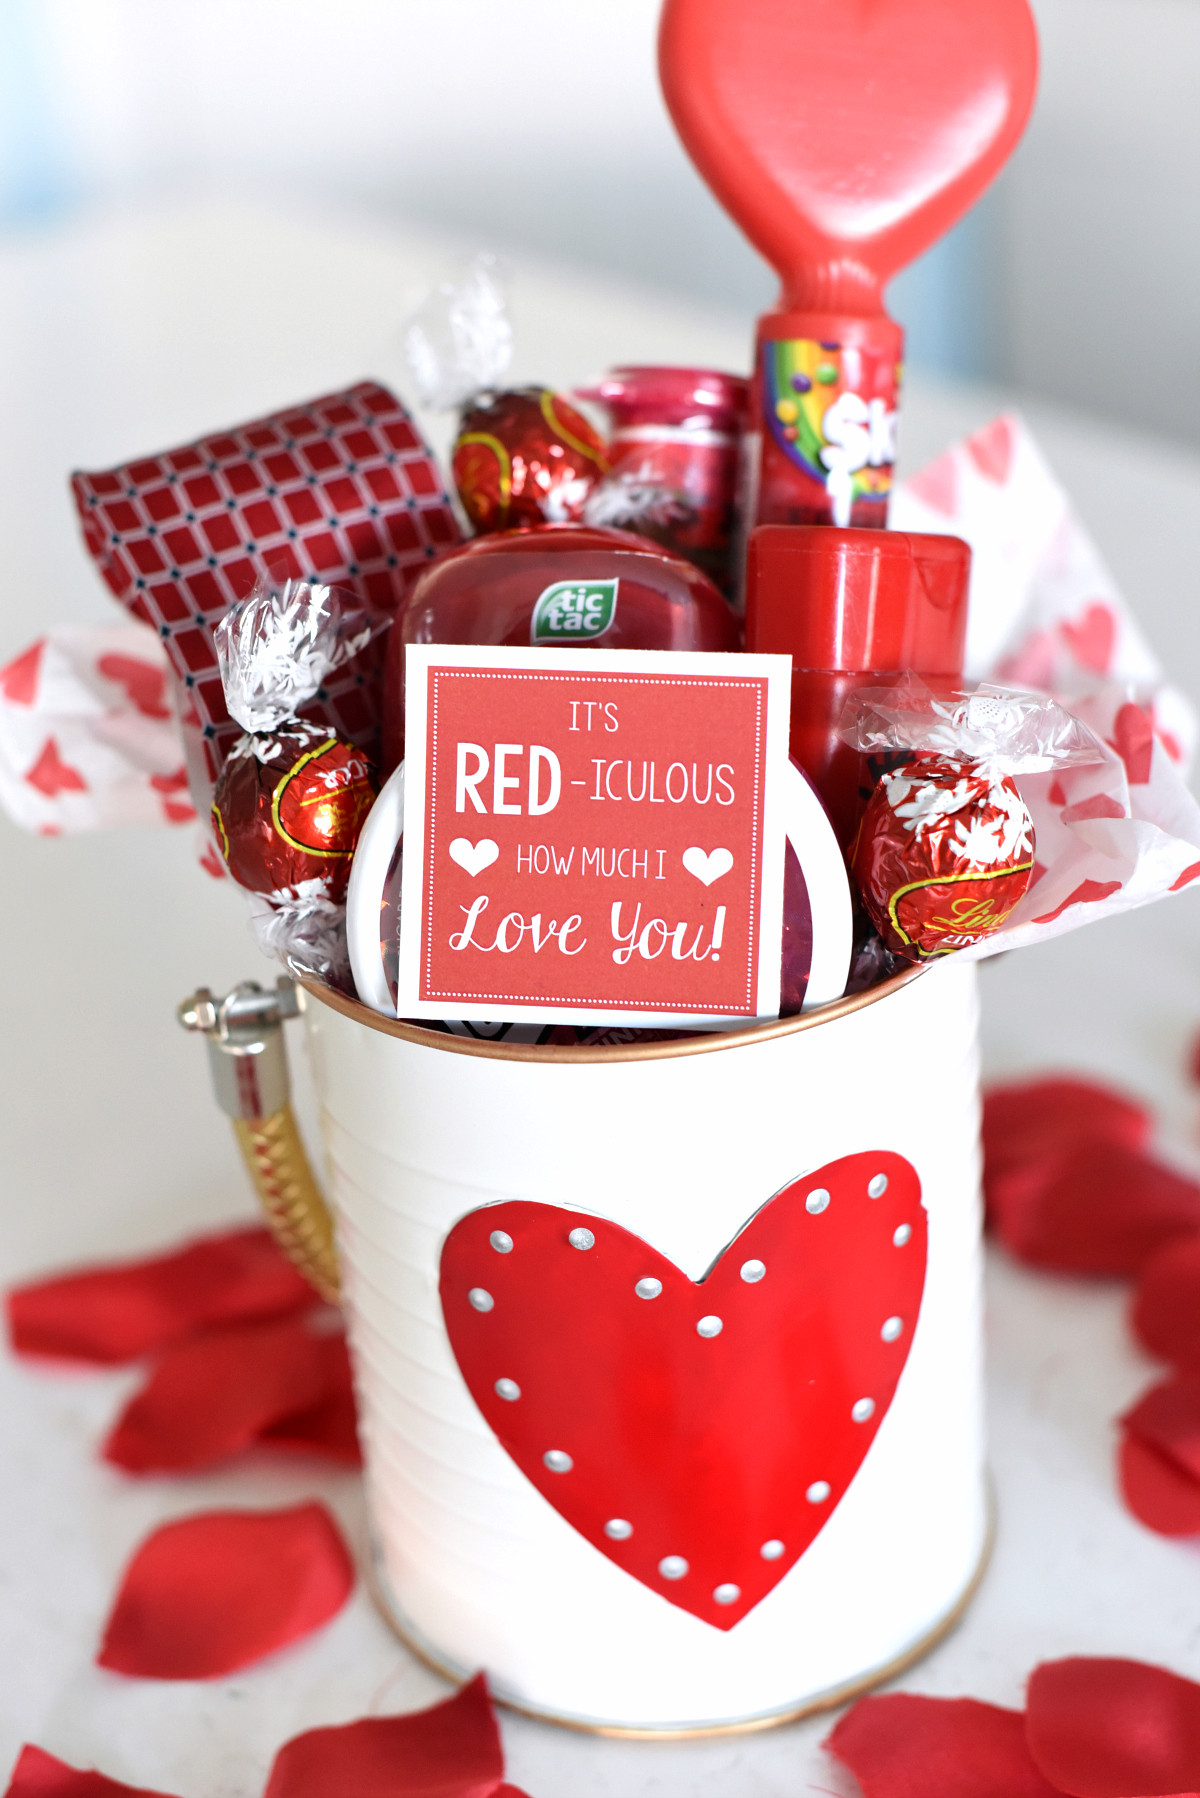 Gift Ideas For First Valentine'S Day
 25 DIY Valentine s Day Gift Ideas Teens Will Love